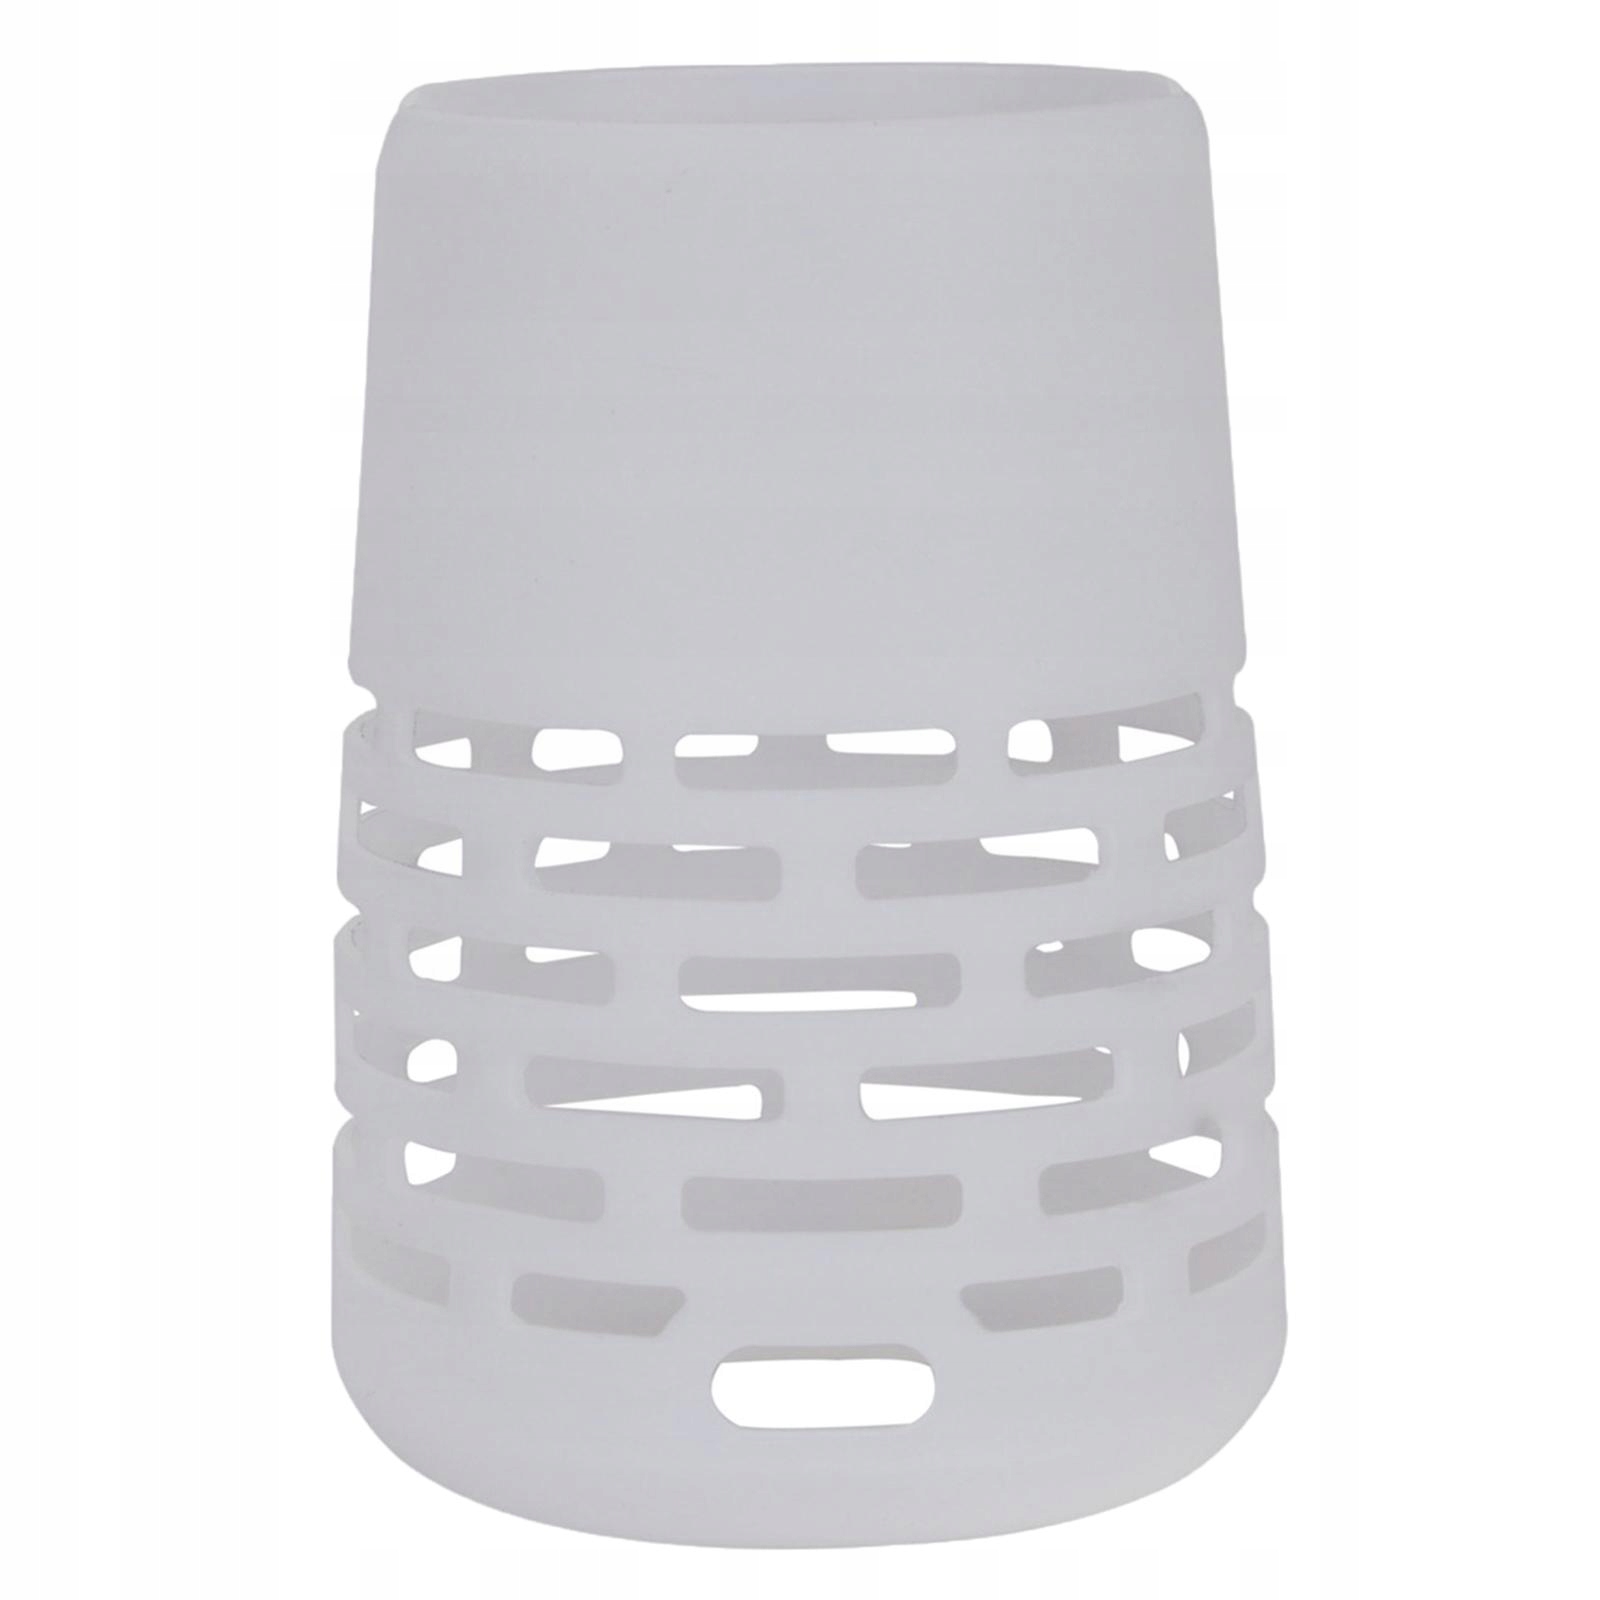 Silicone Carry Case Cover Protector for White